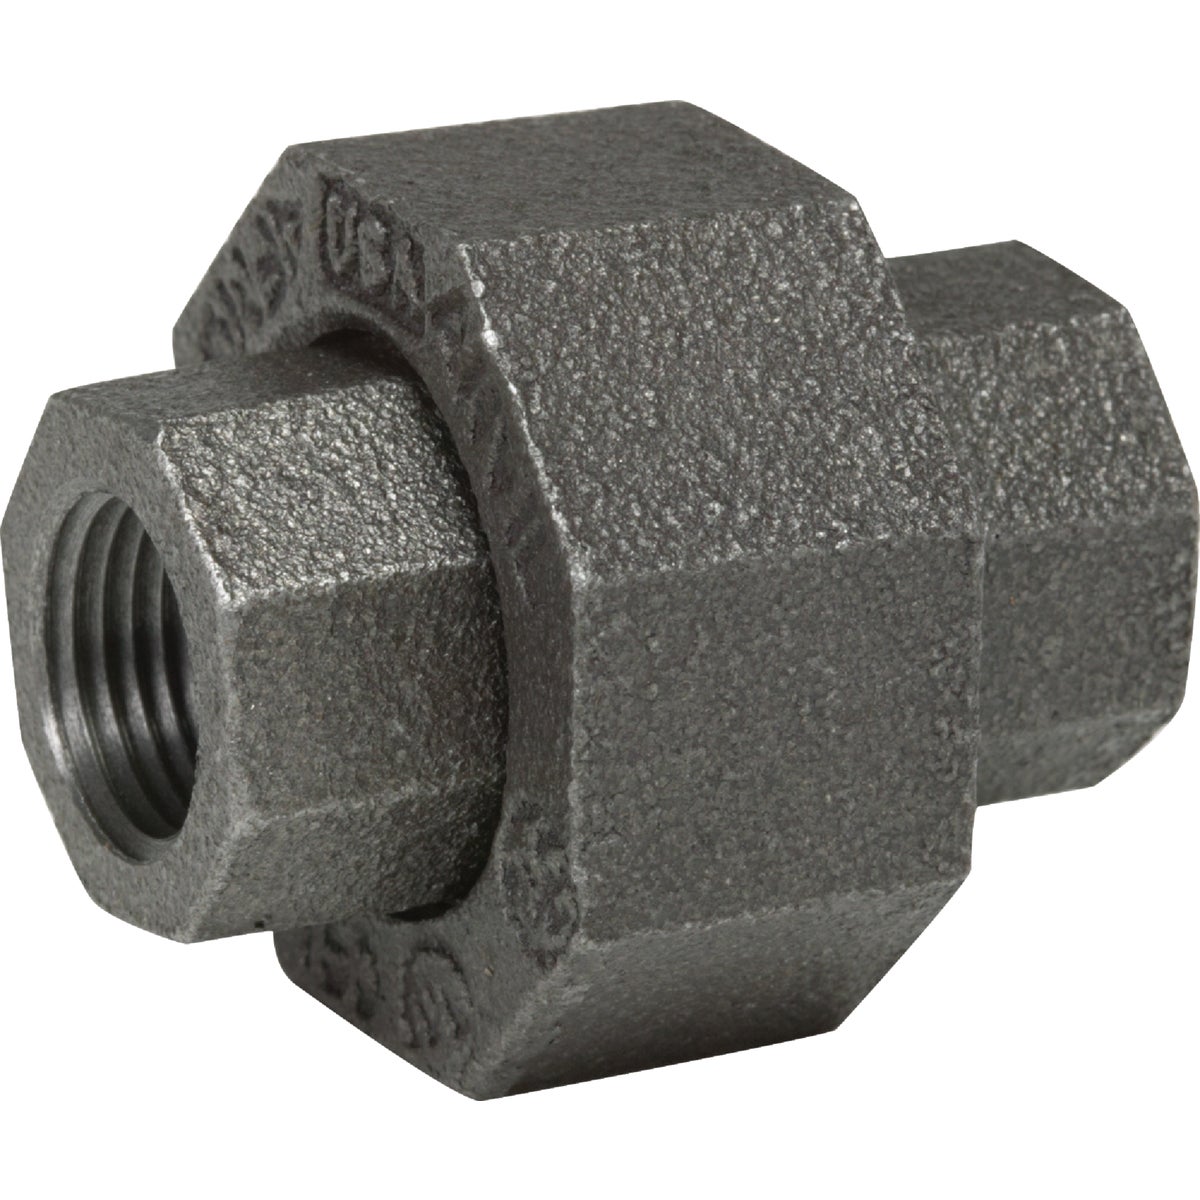 Item 433926, Malleable black iron pipe fittings. Black finish resists rust.